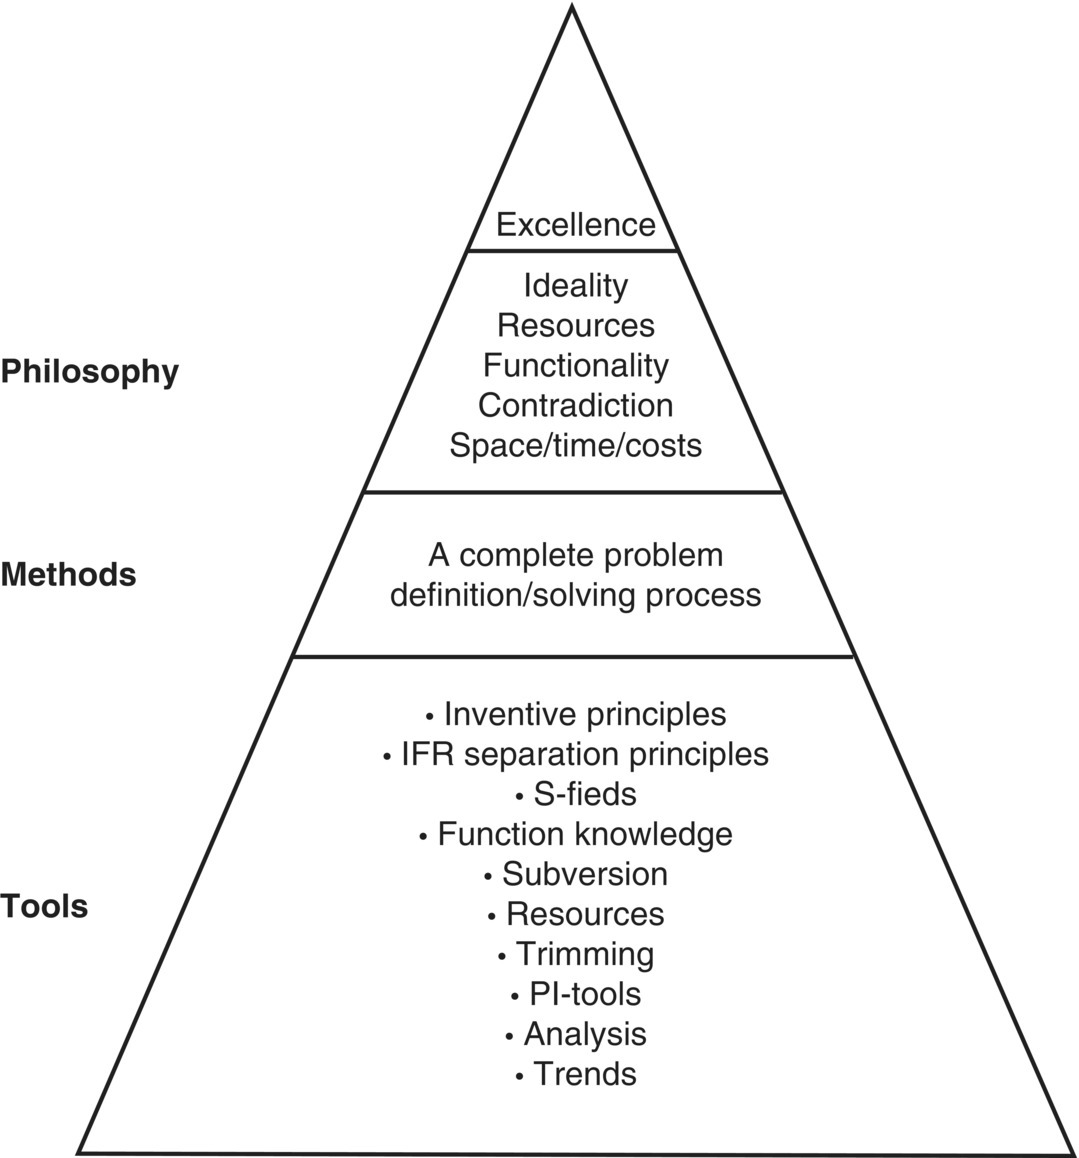 Schematic illustration of tool, Method, & Philosophical Levels of Systematic Innovation.